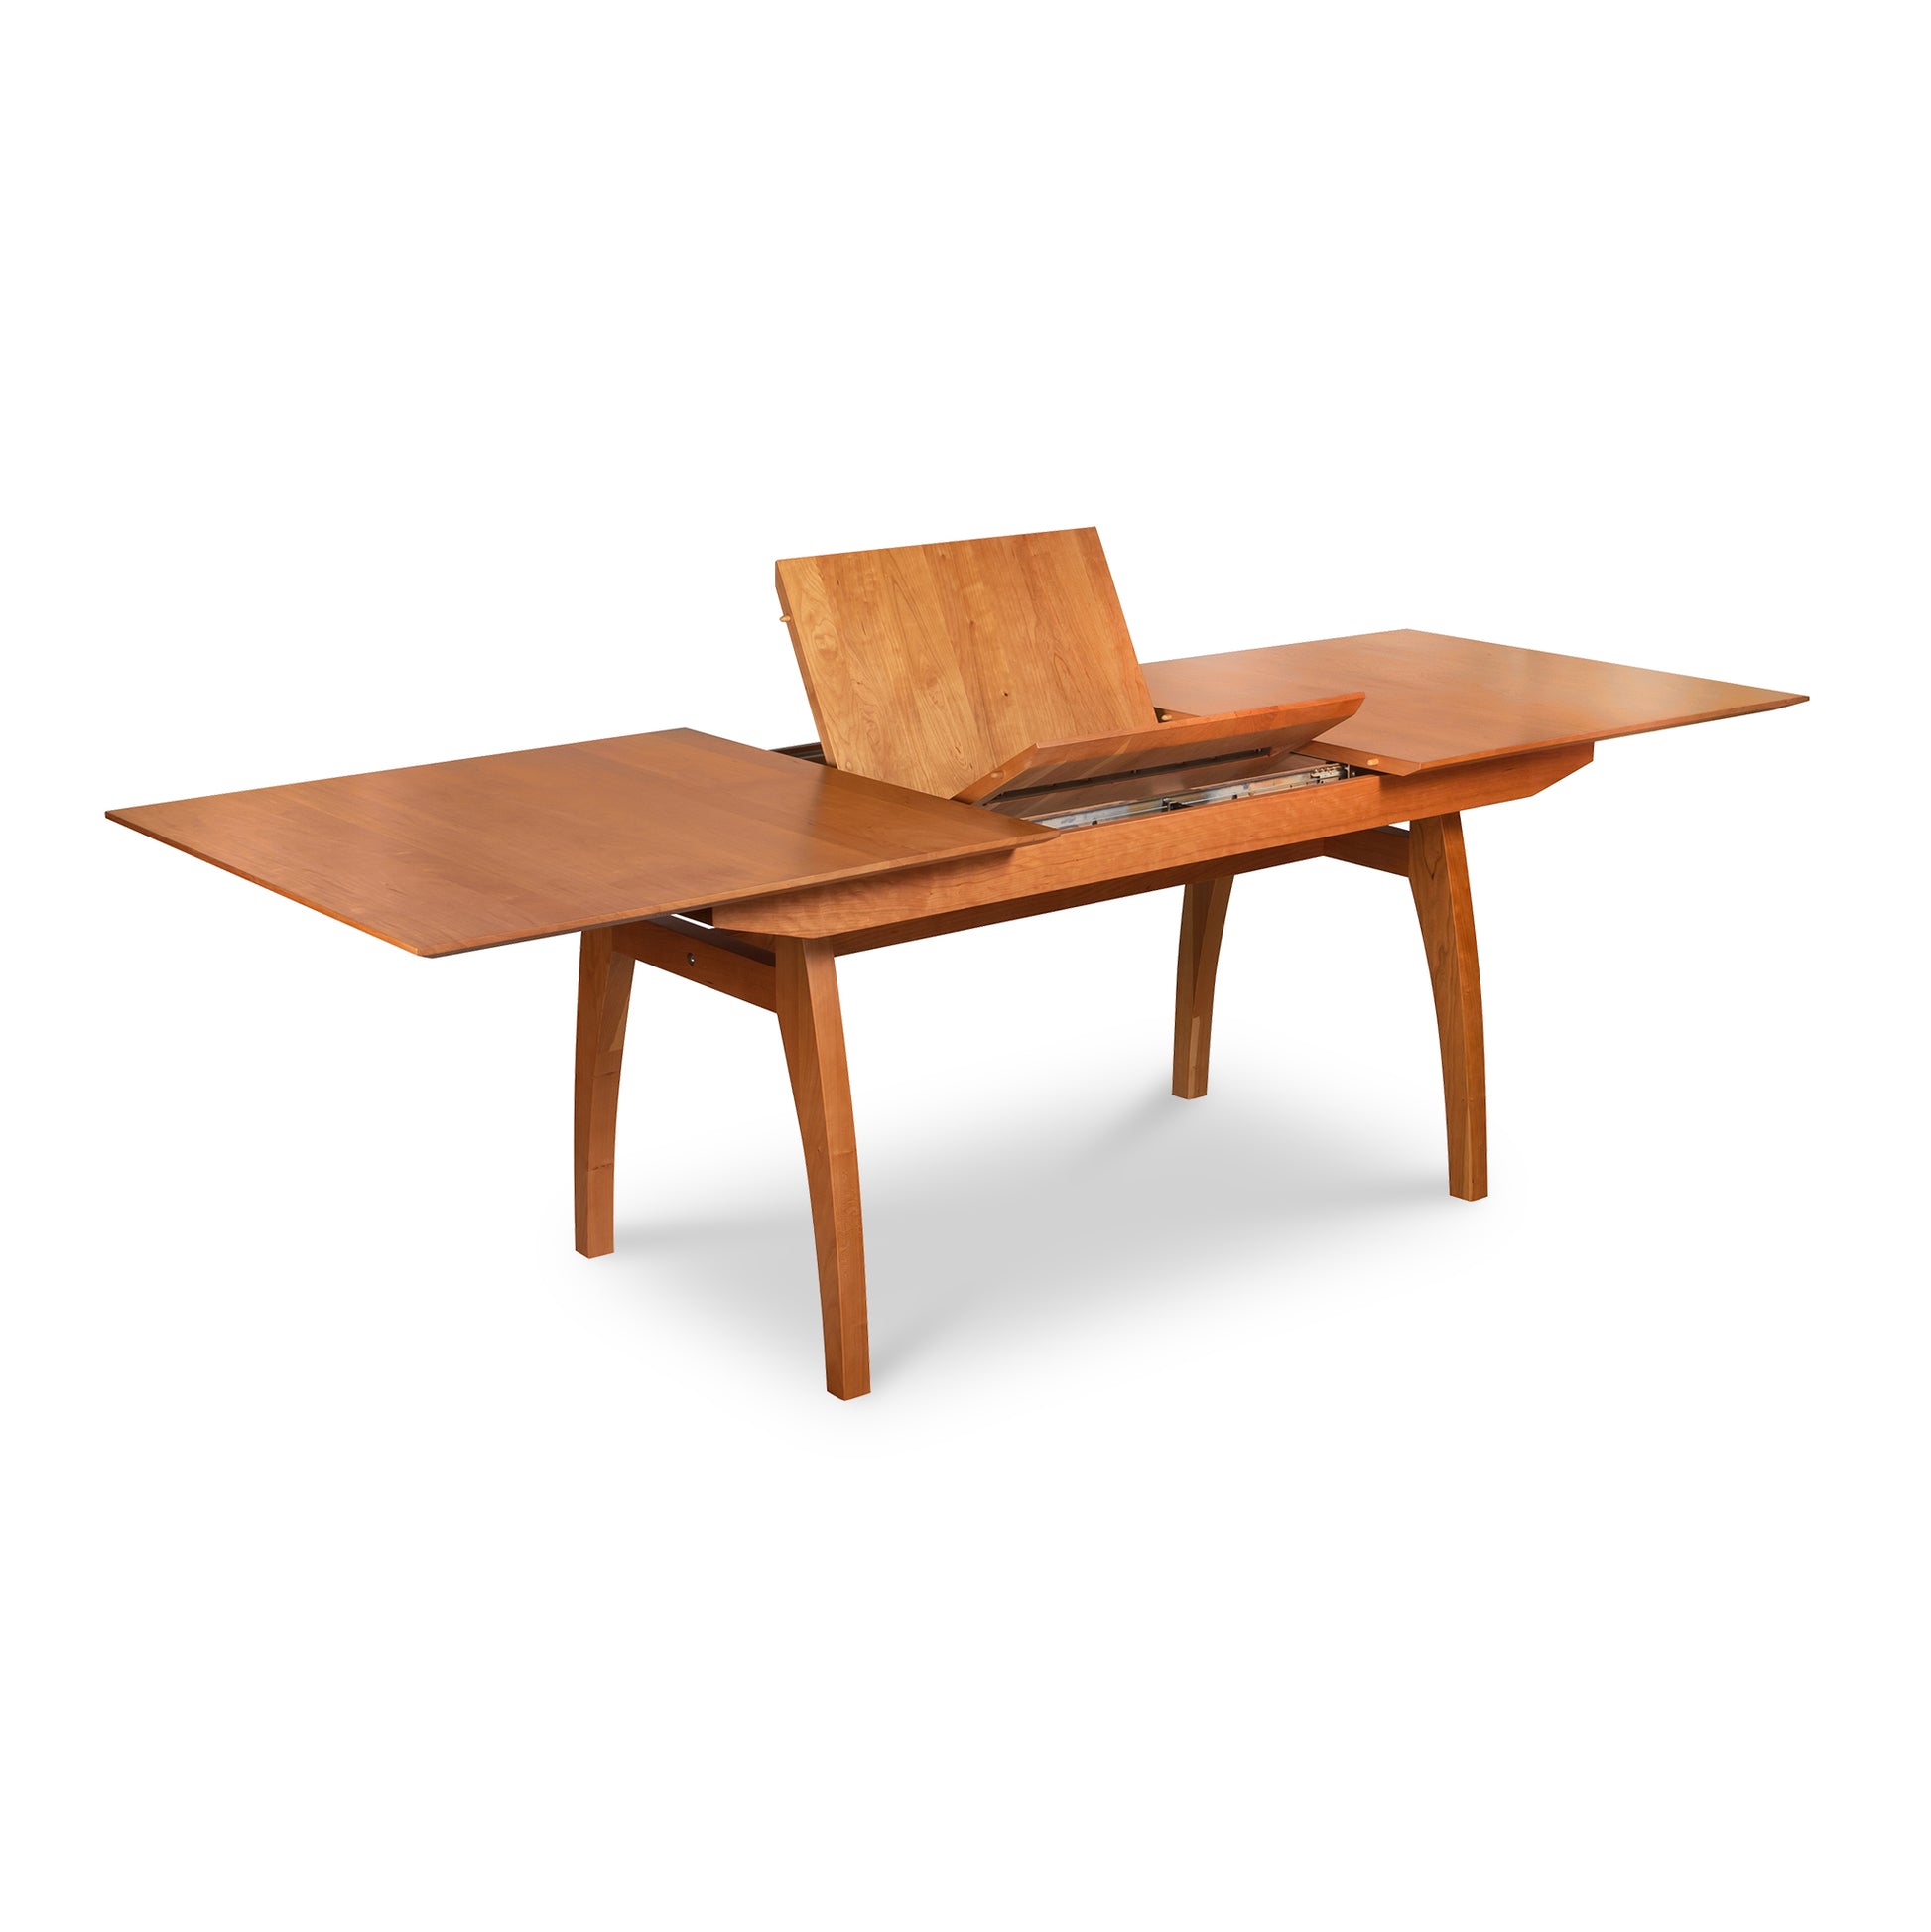 A high-end, handmade Lyndon Furniture Vermont Modern Butterfly Extension Table - Floor Model.